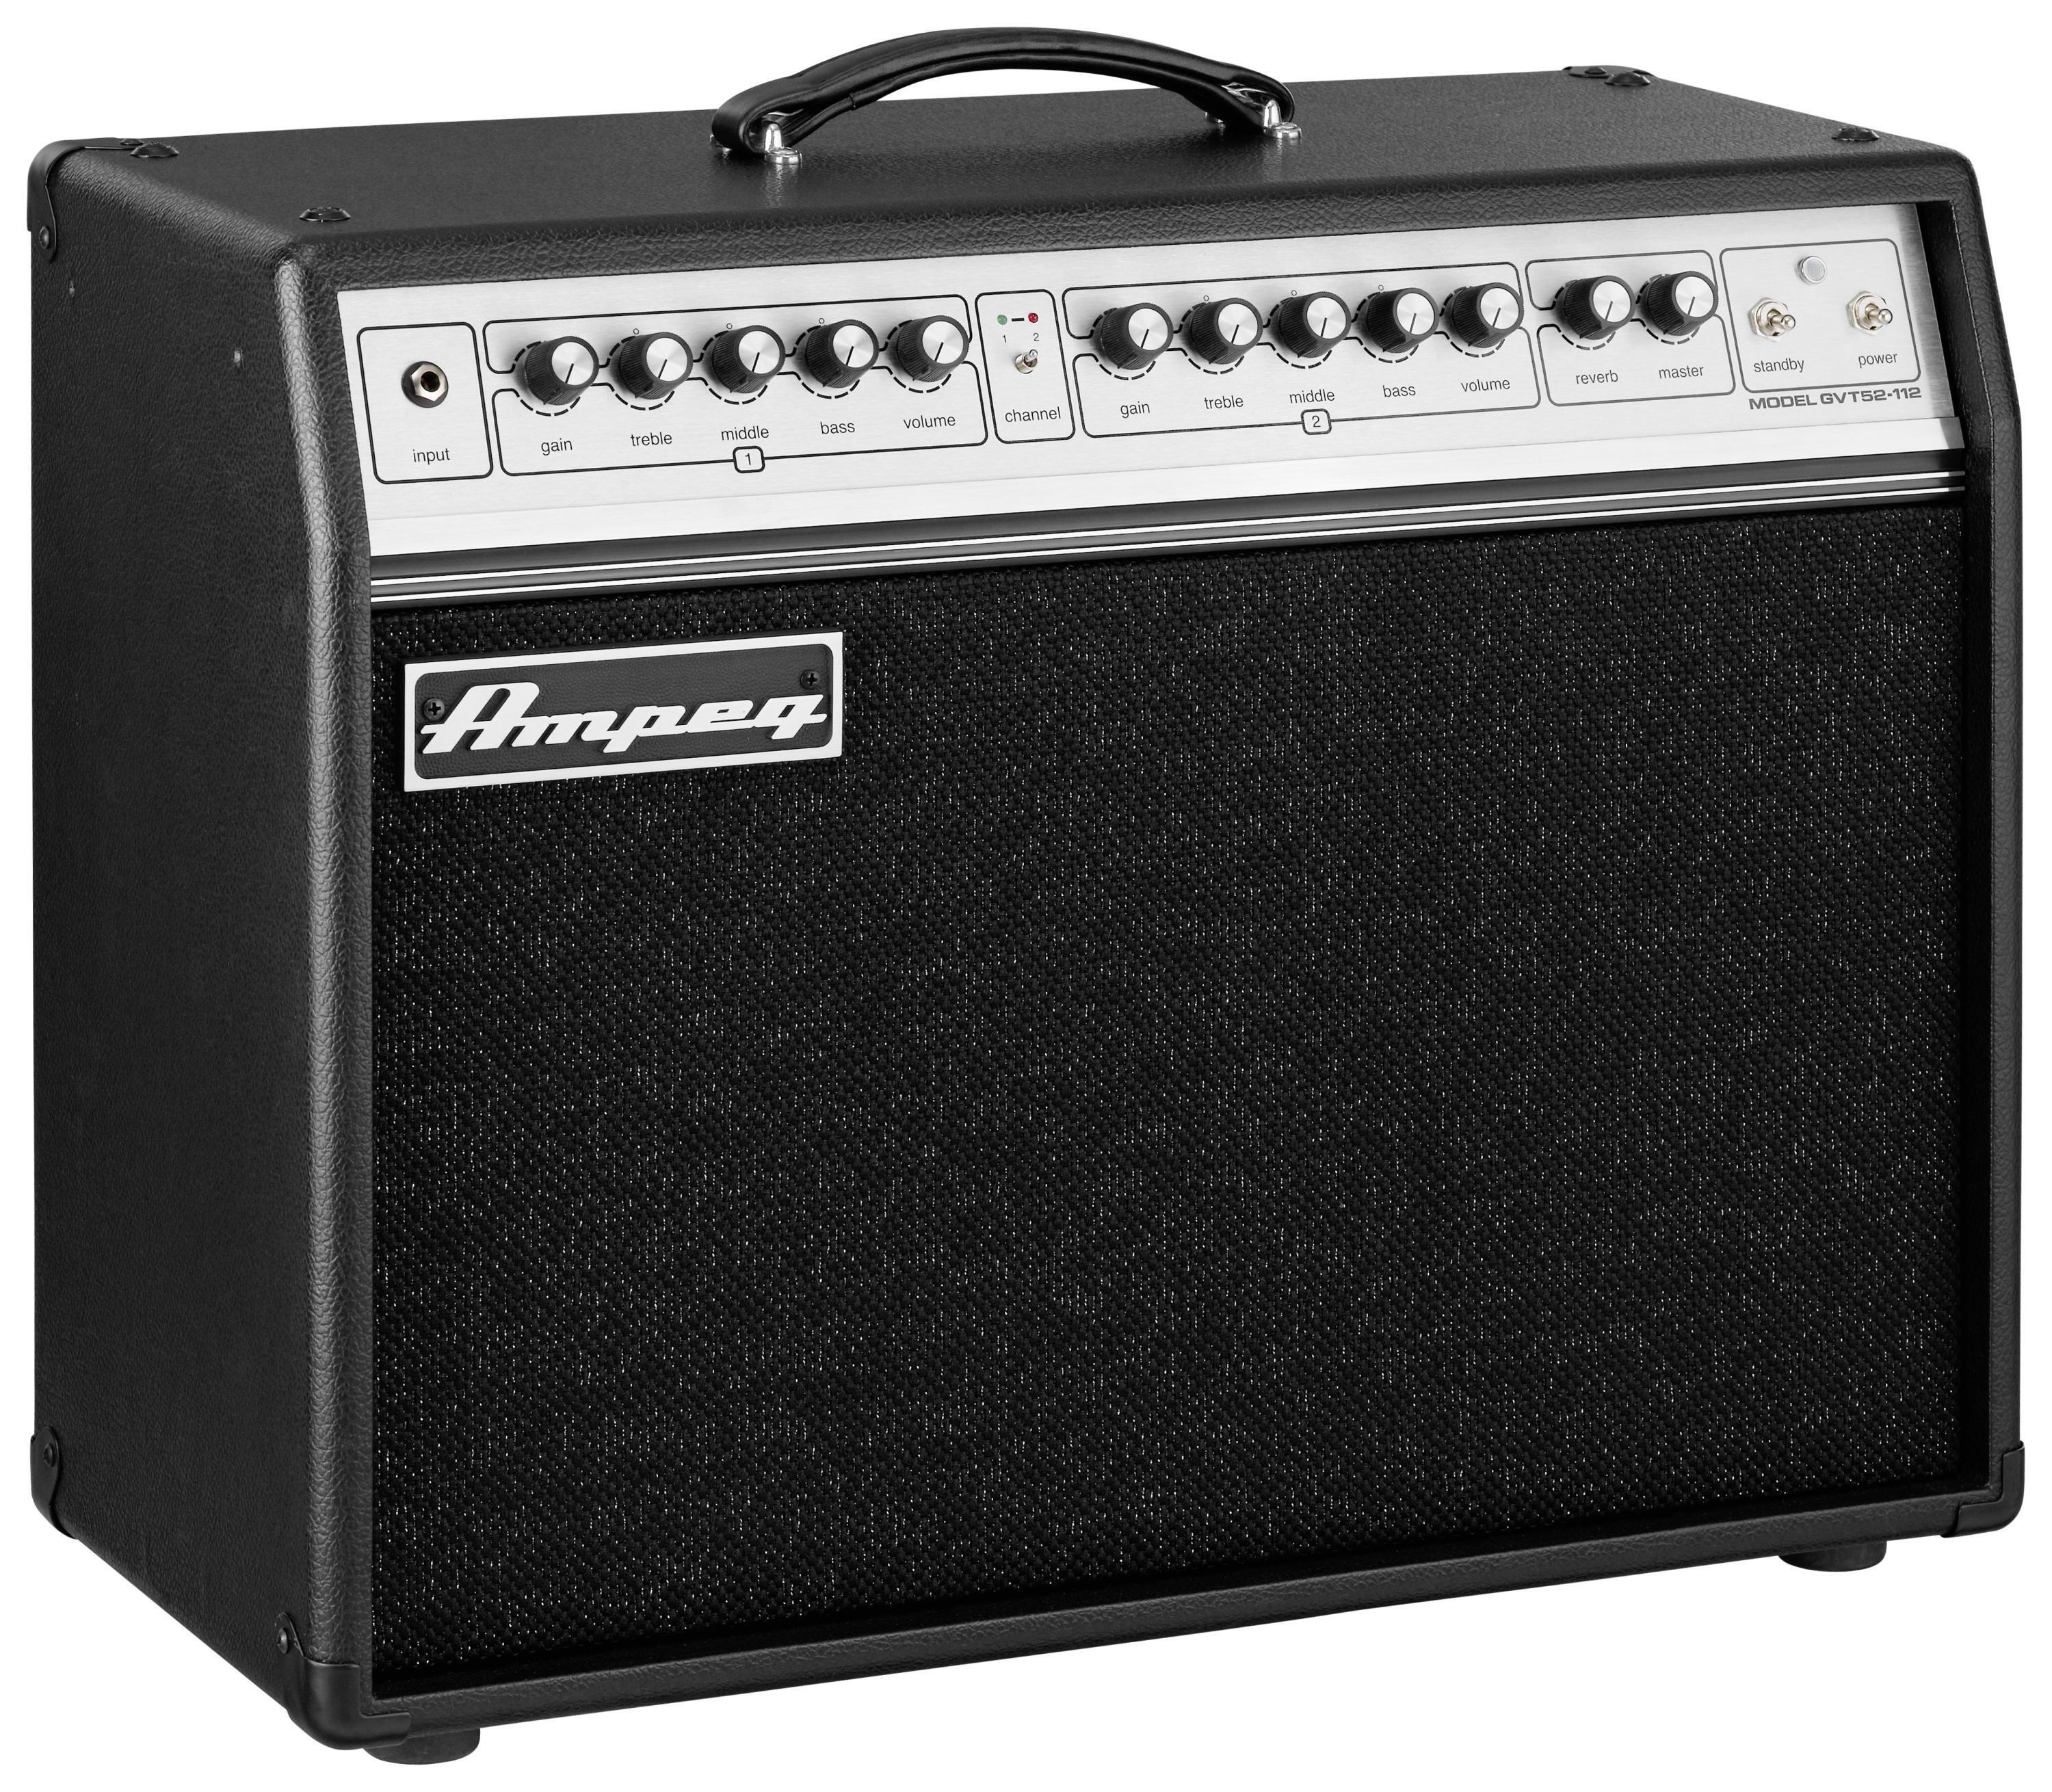 Ampeg GVT52-112 | Sweetwater